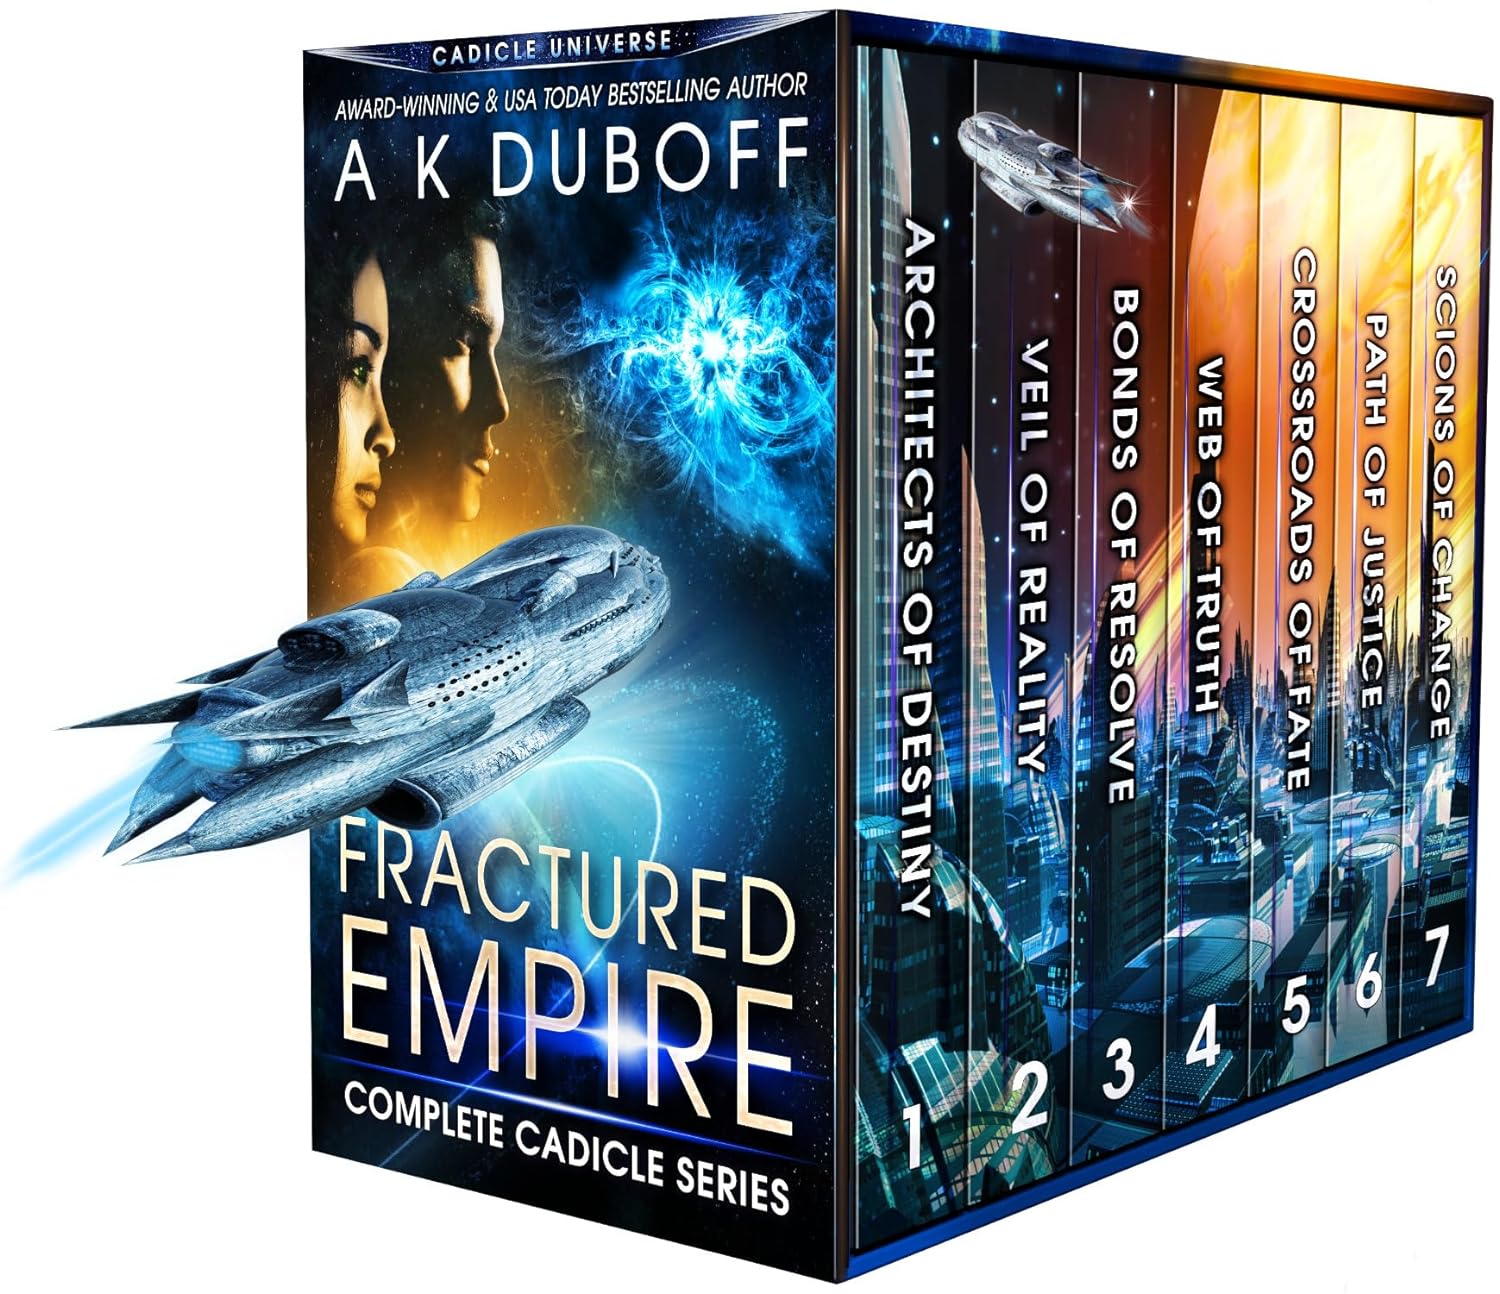 Fractured Empire - Complete Cadicle Series (Books 1-7) - FREE Kindle bundle